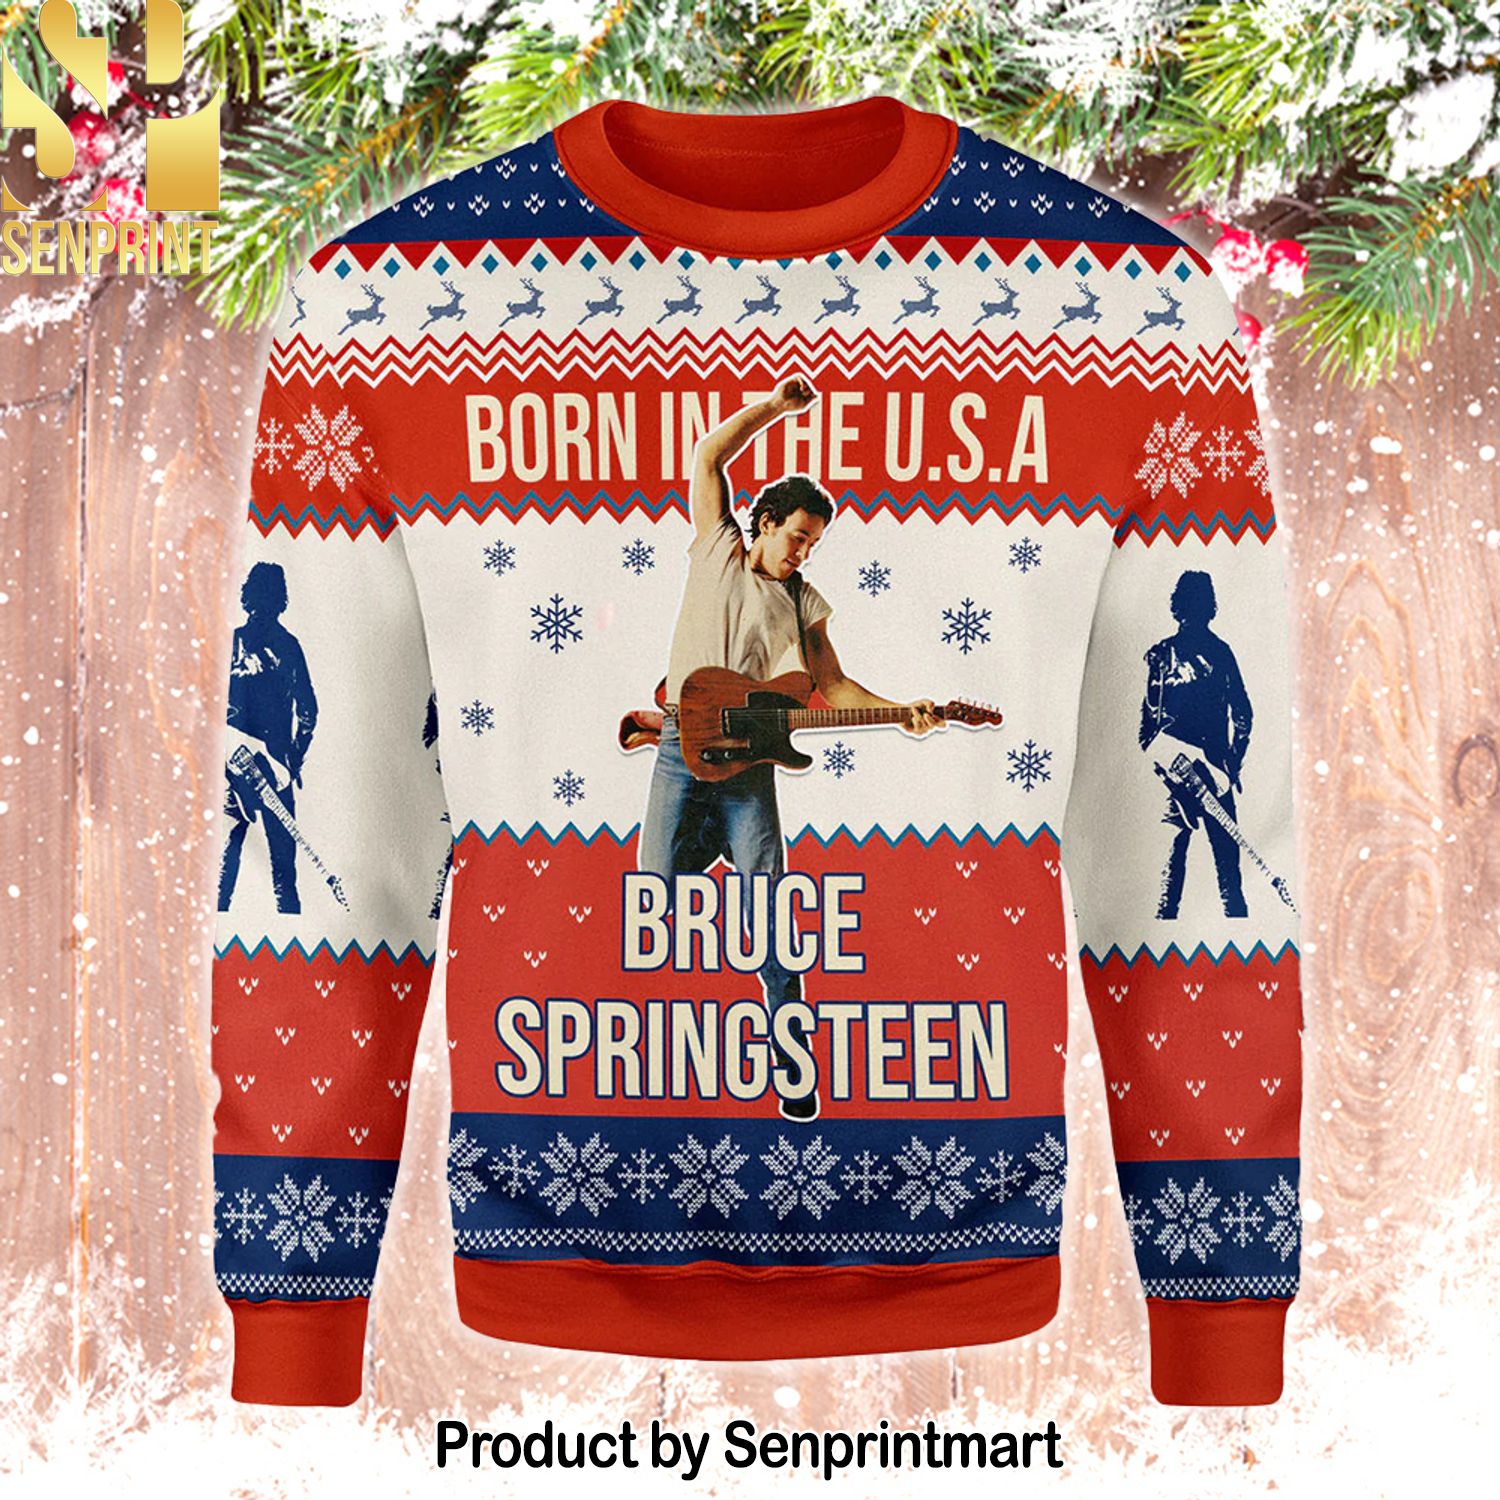 Bruce Springsteen Knitting Pattern Ugly Christmas Sweater